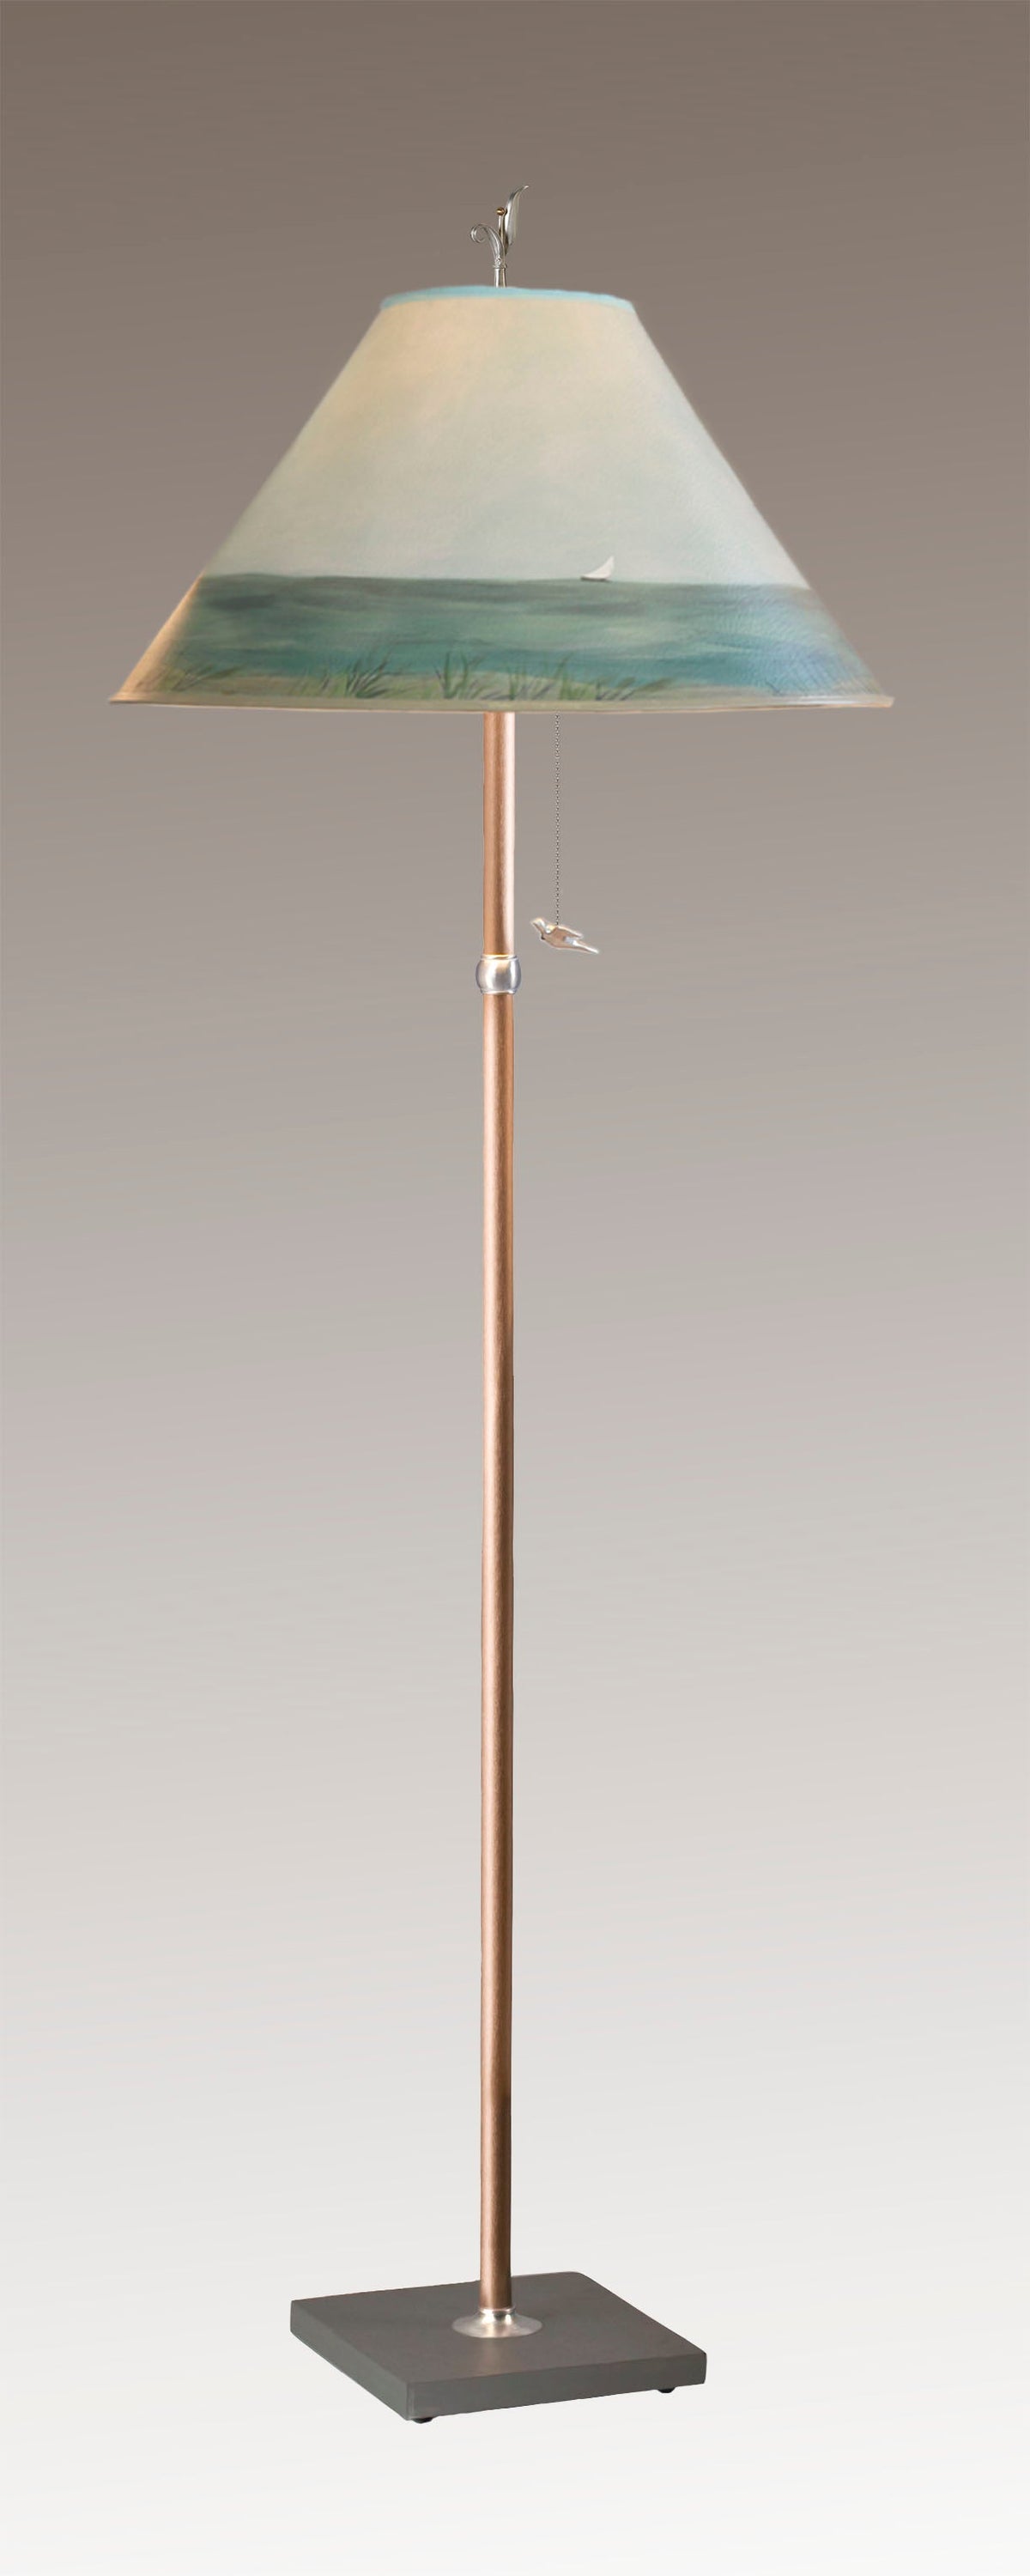 Copper Floor Lamp with Large Conical Shade in Shore